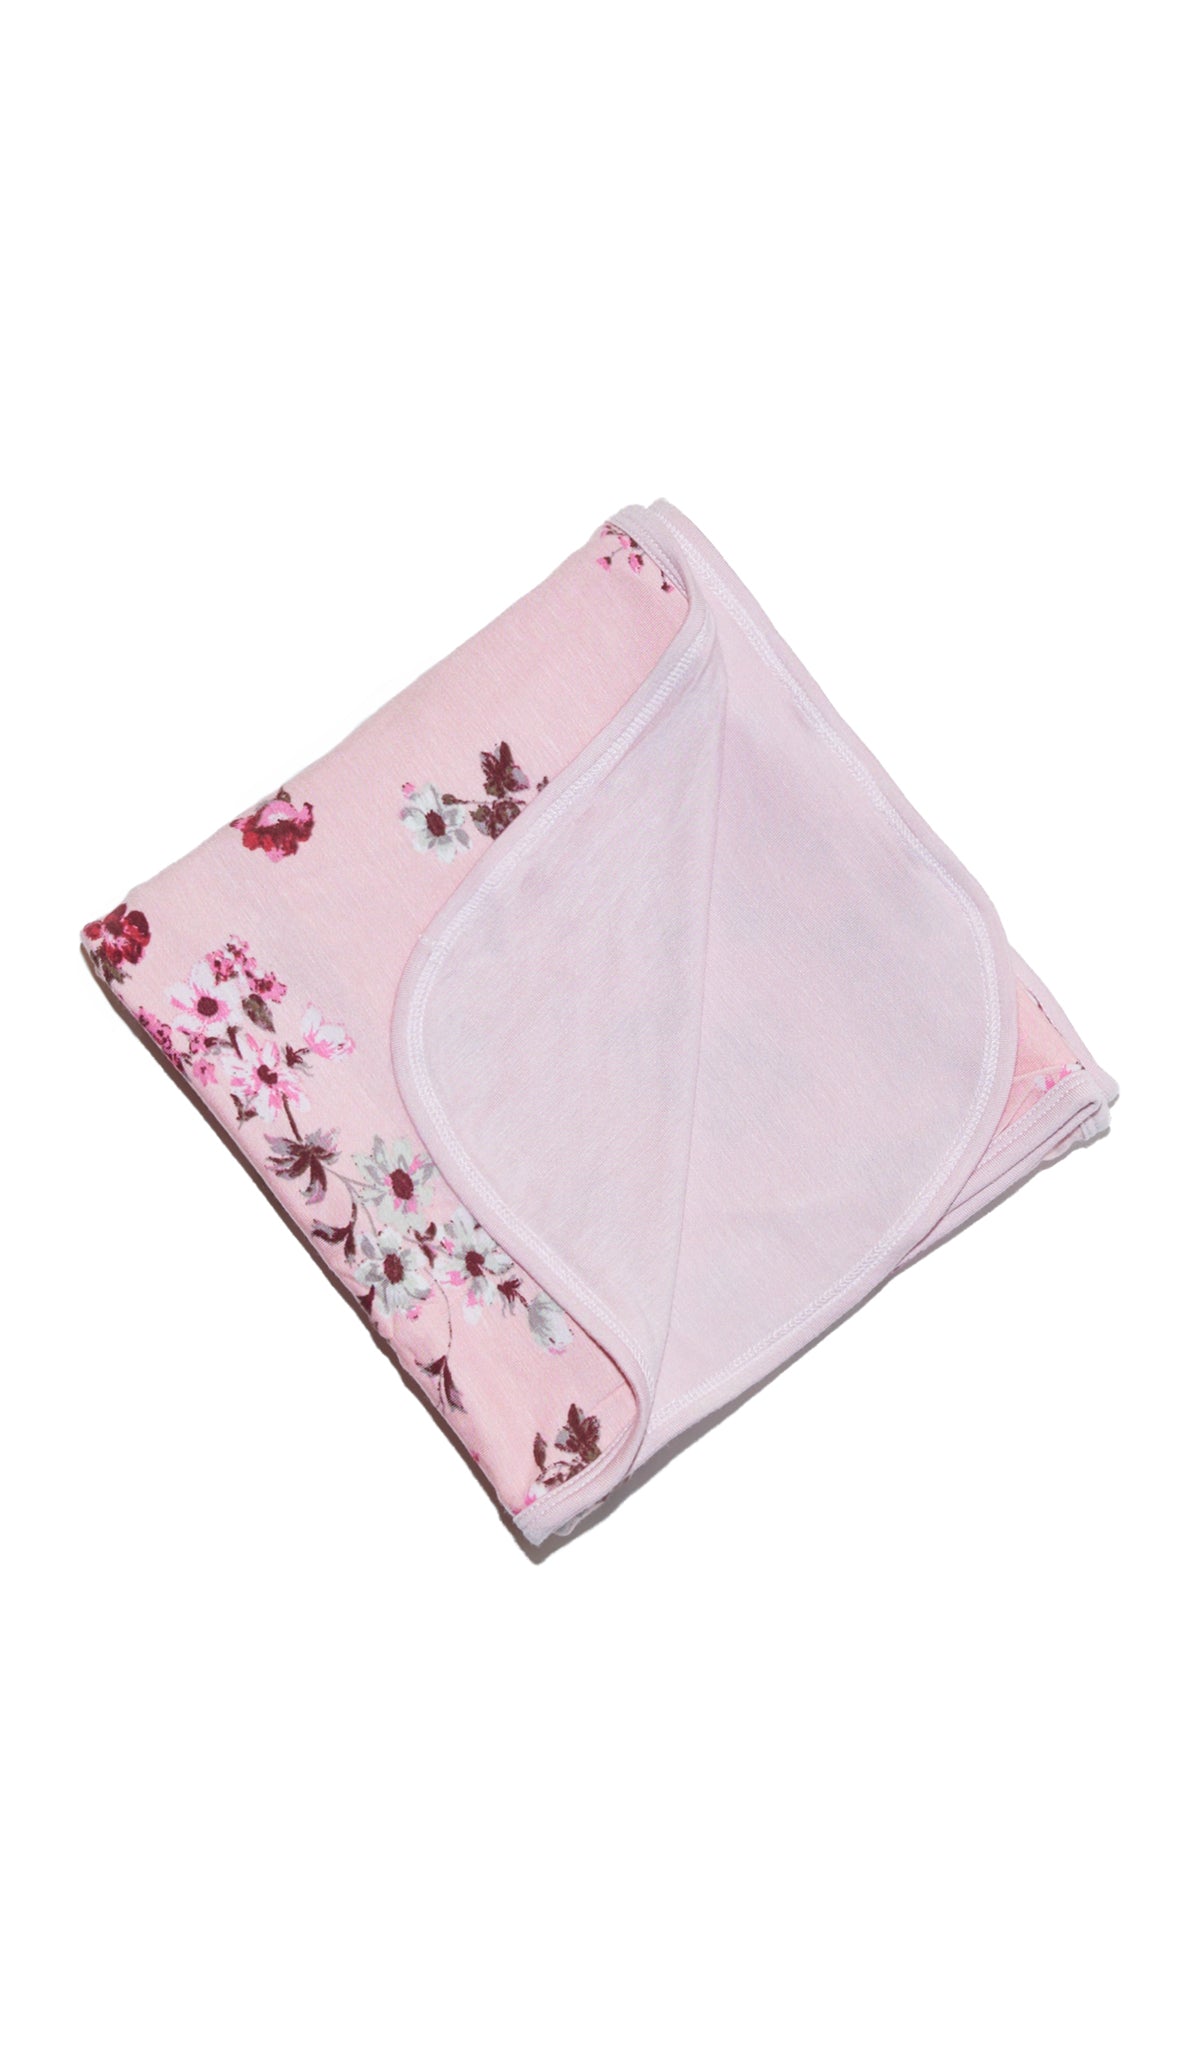 Blossom Swaddle Blanket folded into a square with print showing on one side and reversible contrast solid showing on other side of fold down flap.